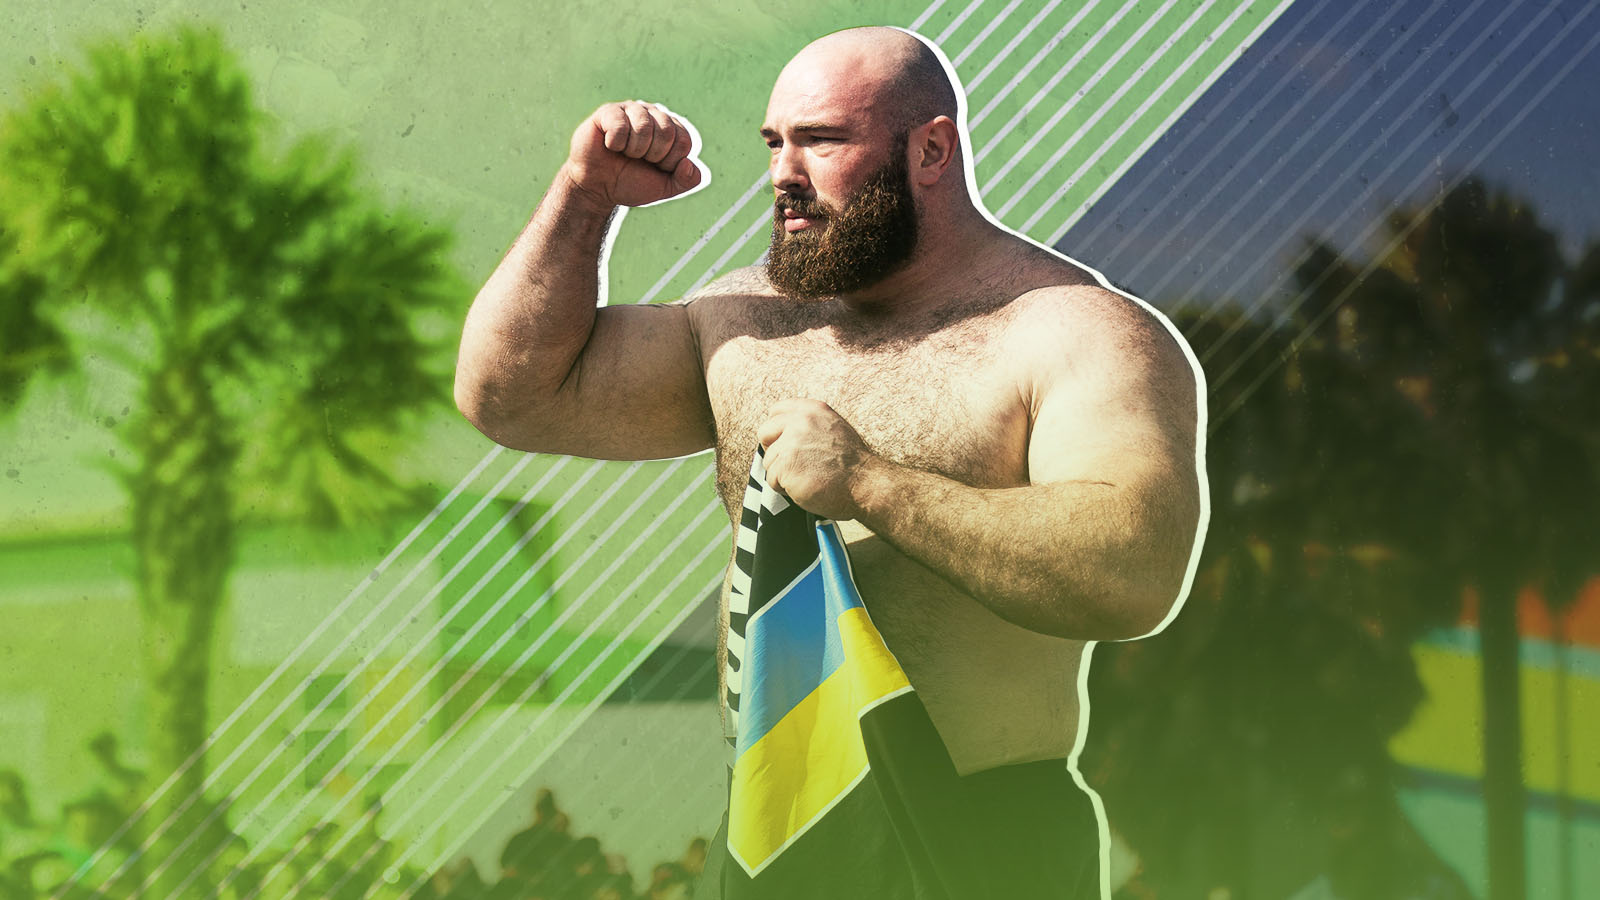 Who is The World's Strongest Man 2023? Ranking the top five